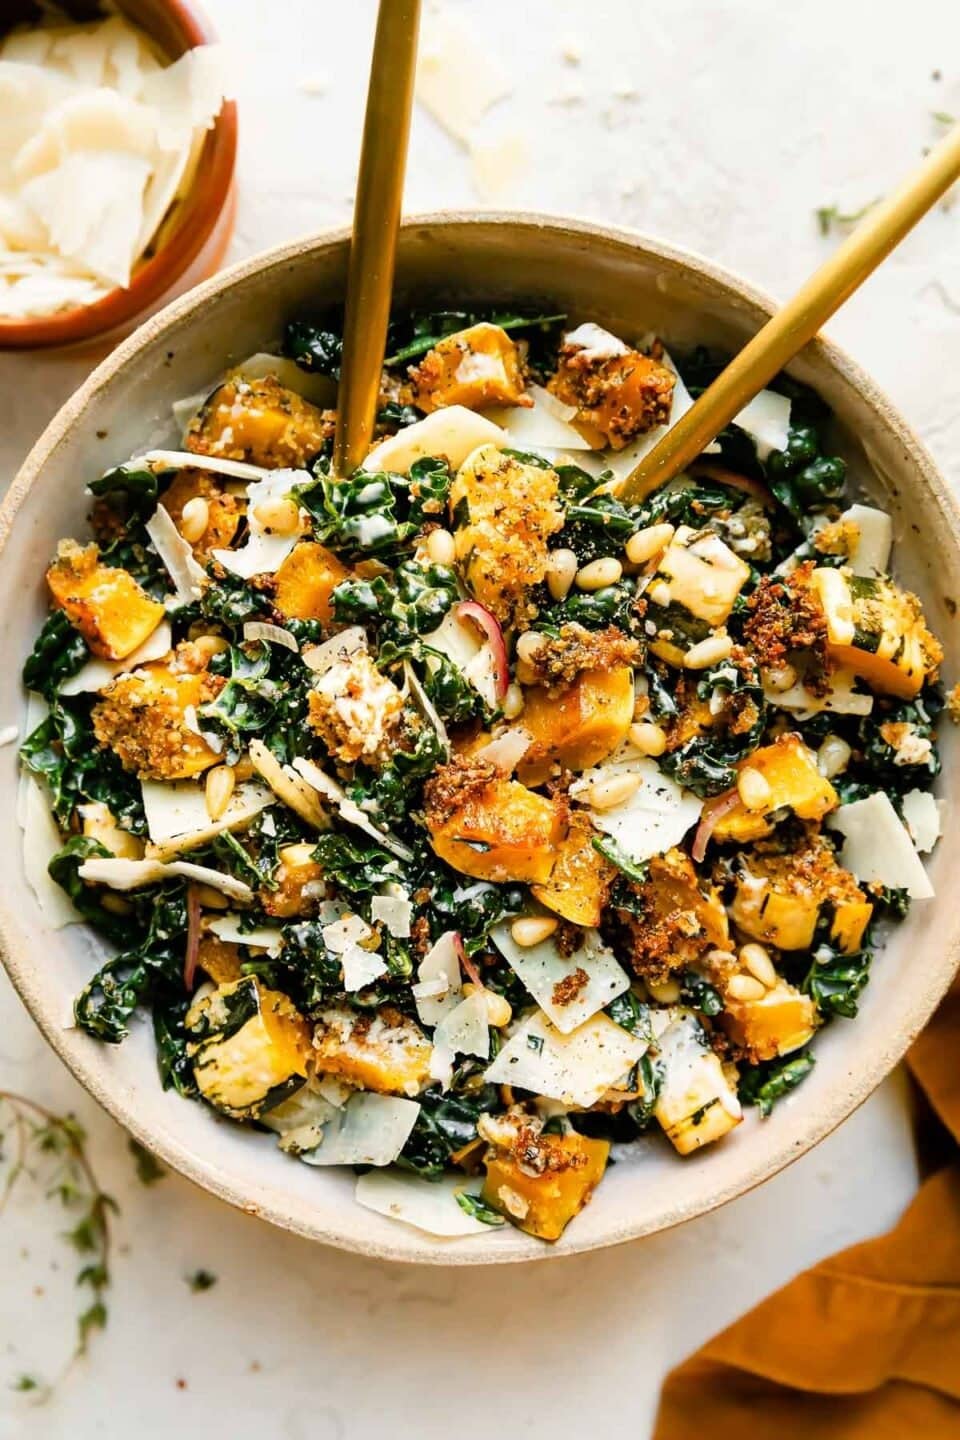 Autumn salad with massaged kale, shaved parmesan, toasted pine nuts, parmesan roasted delicata squash "croutons," and Caesar dressing.